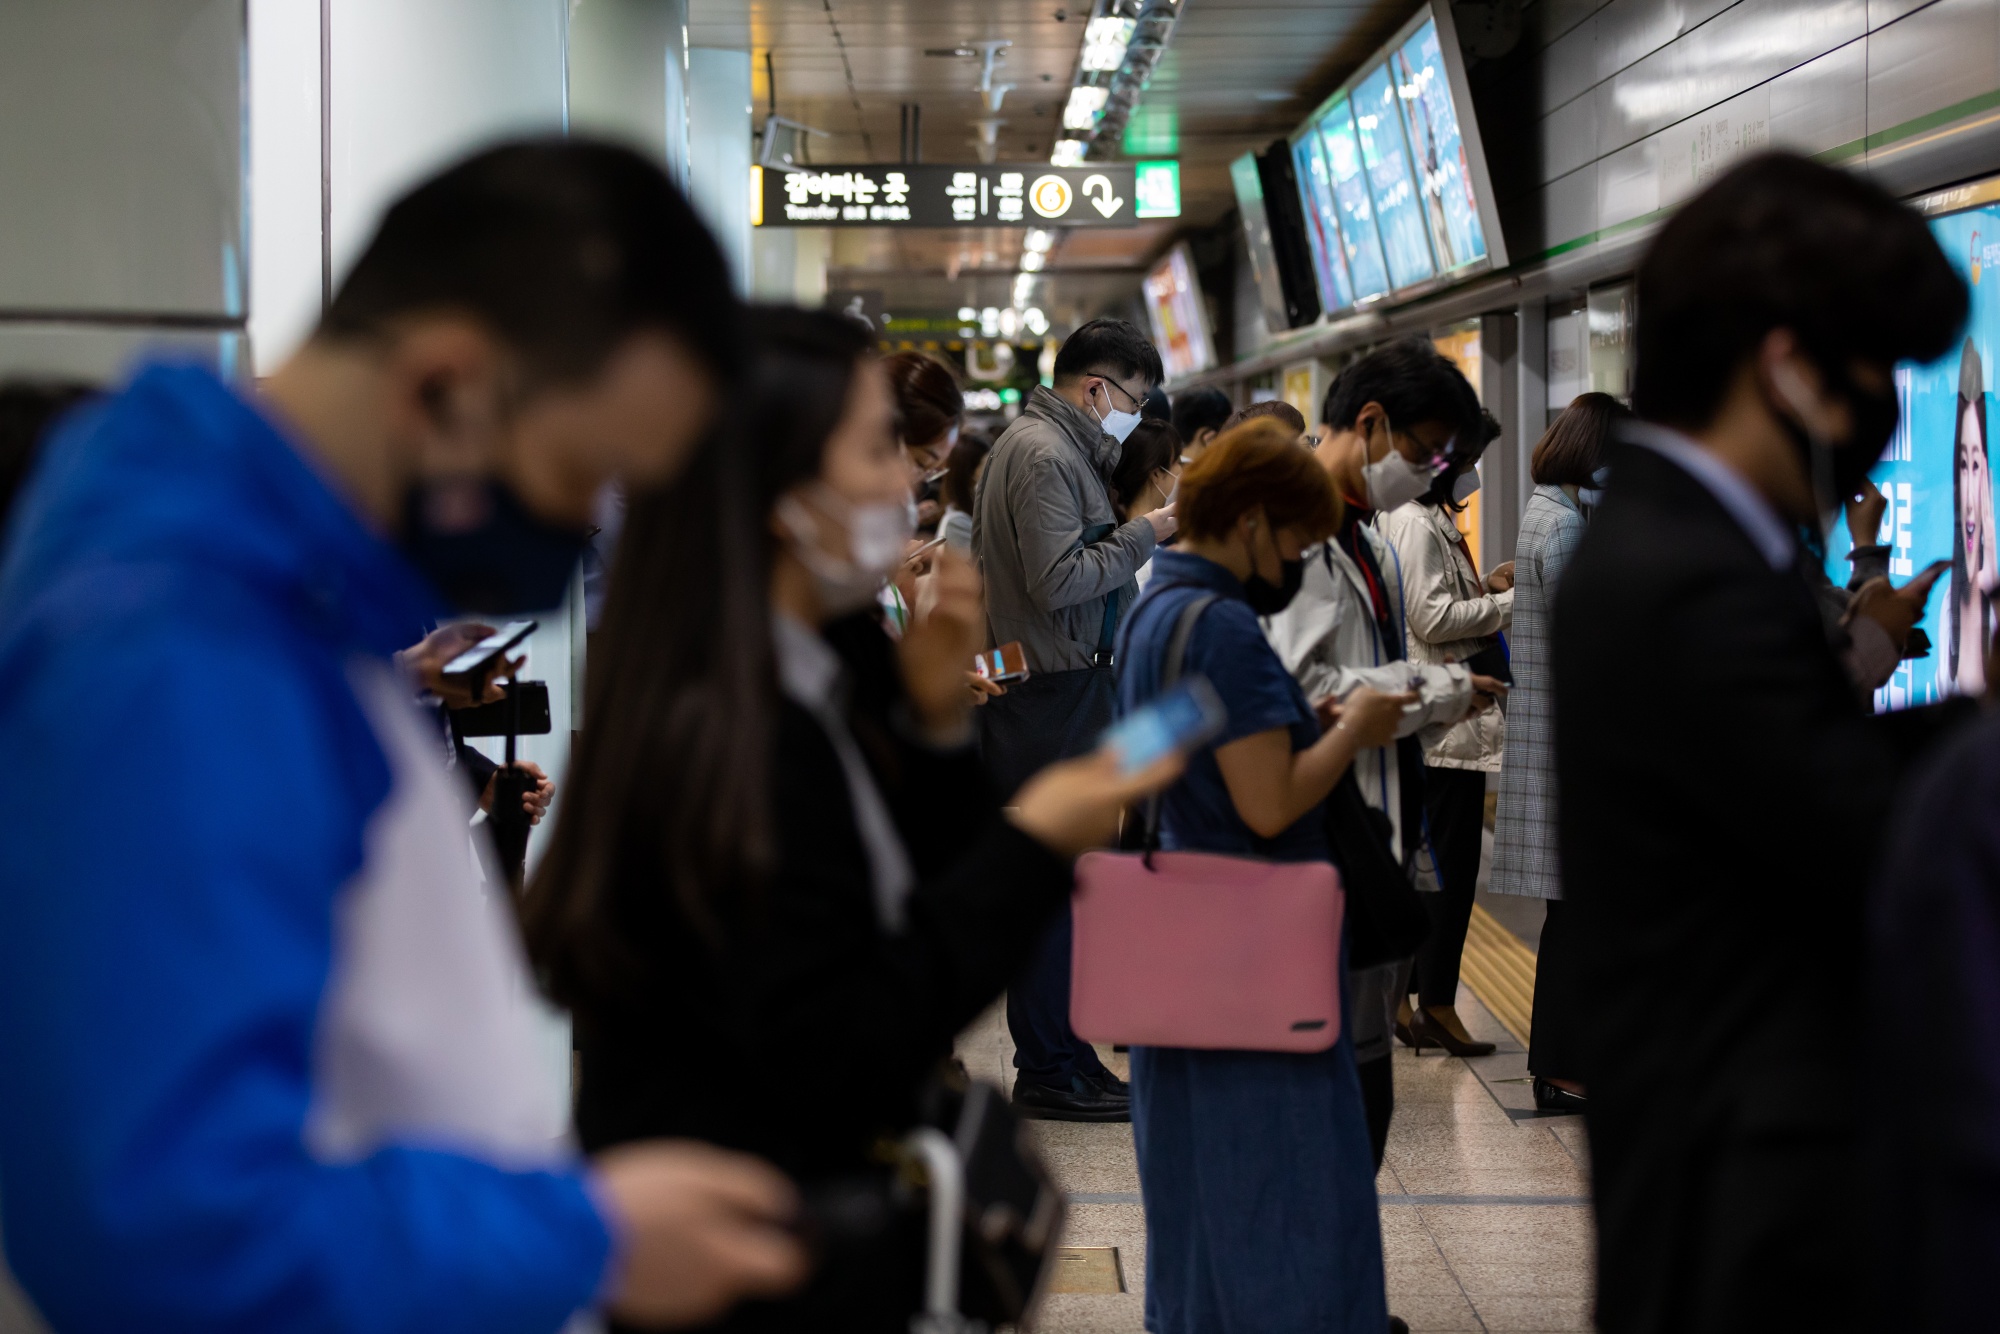 Passengers wearing protective masks wait in line on a platform inside a subway station in Seoul on May 18.